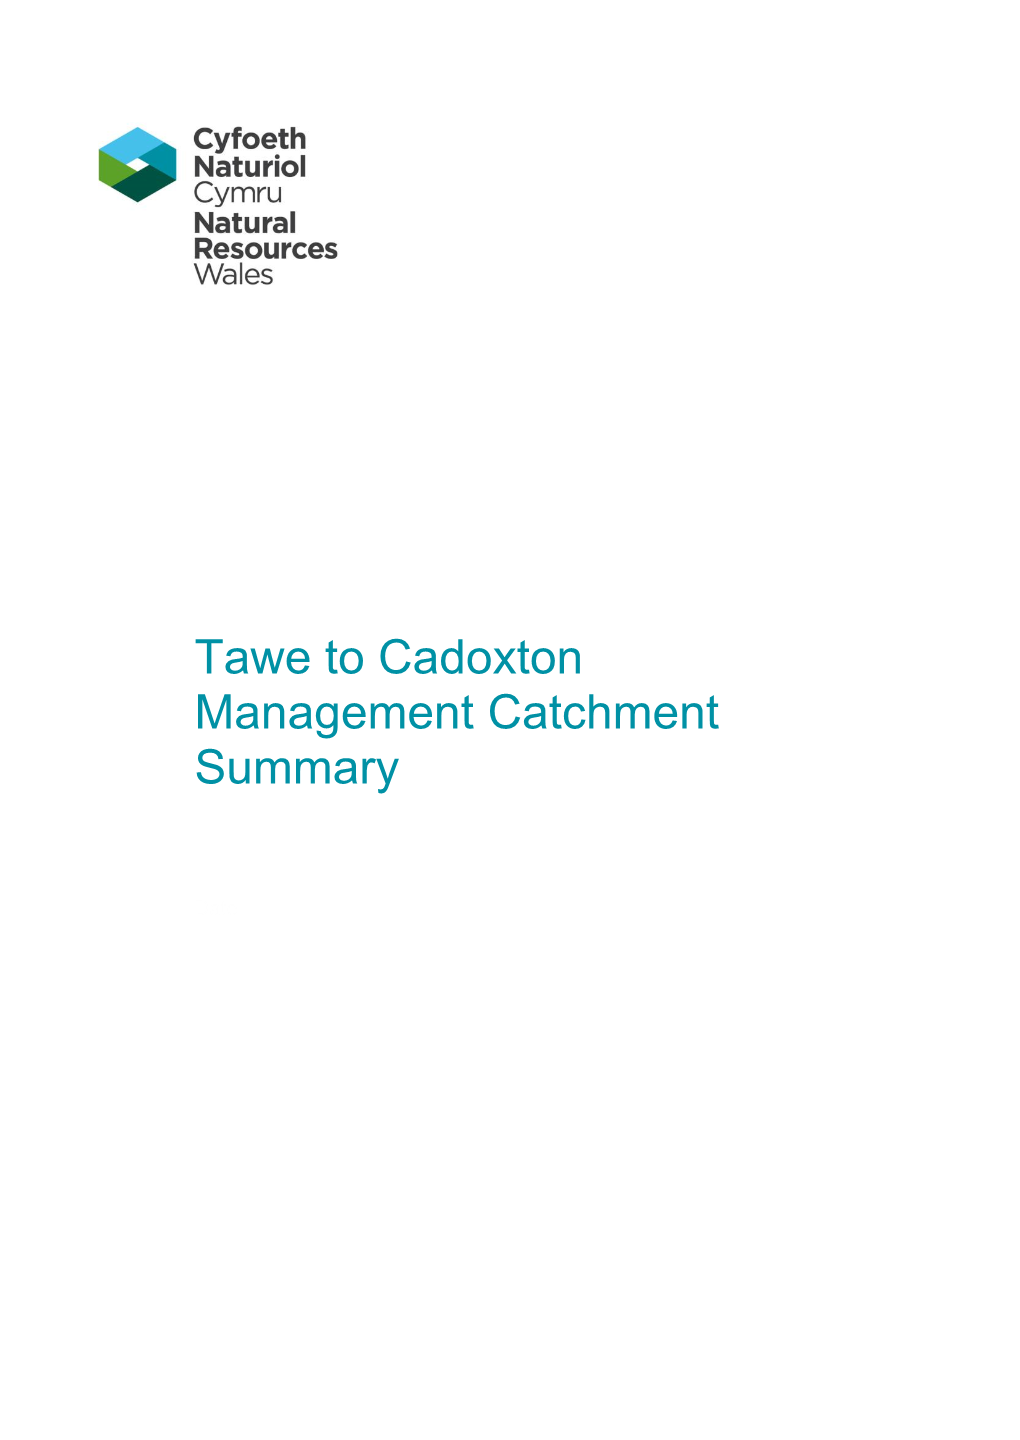 Tawe to Cadoxton Management Catchment Summary